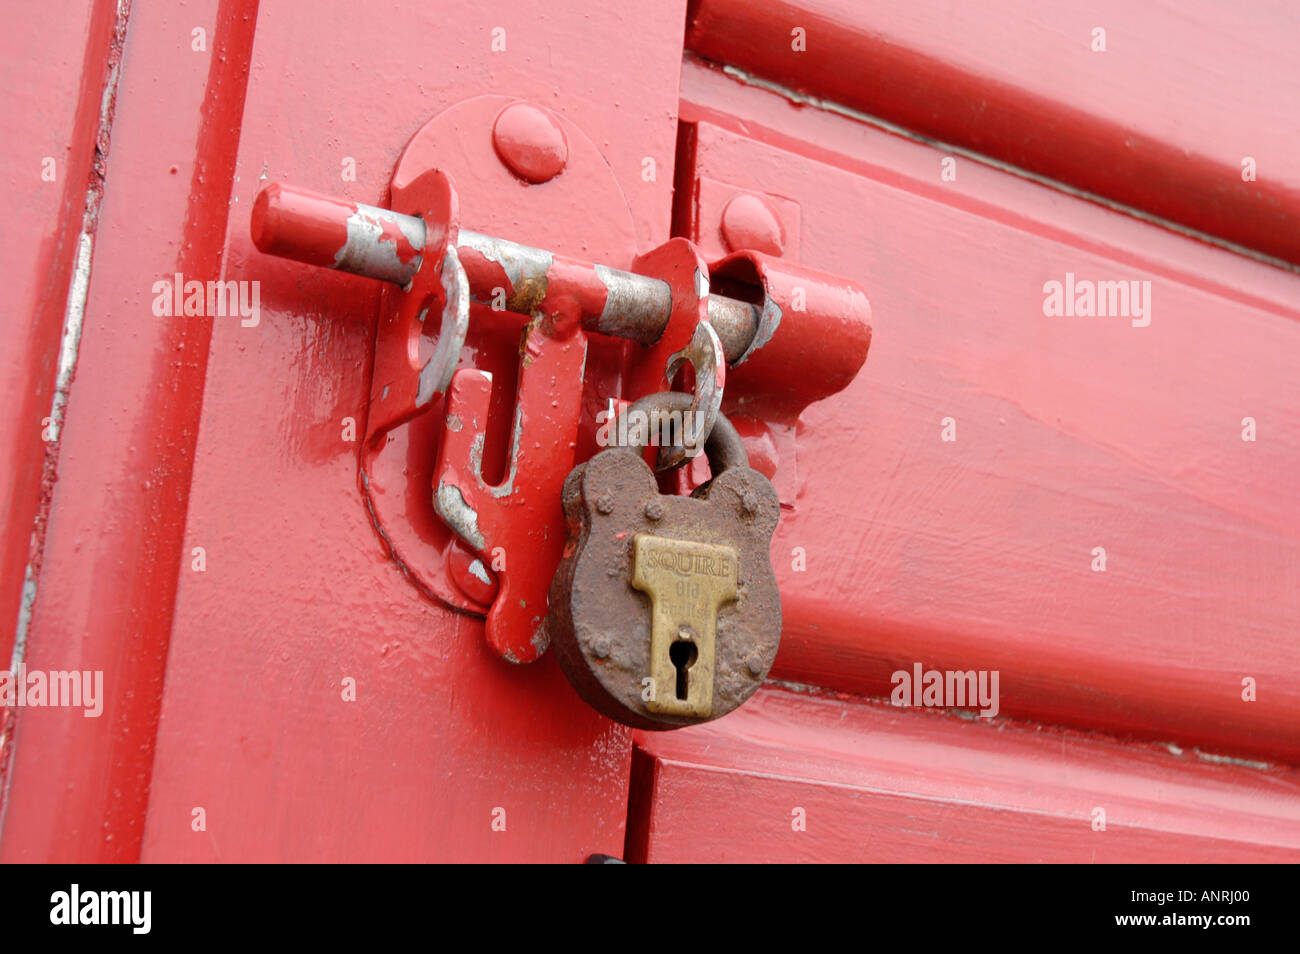 padlock and hasp and staple to secure red painted shed door Stock Photo